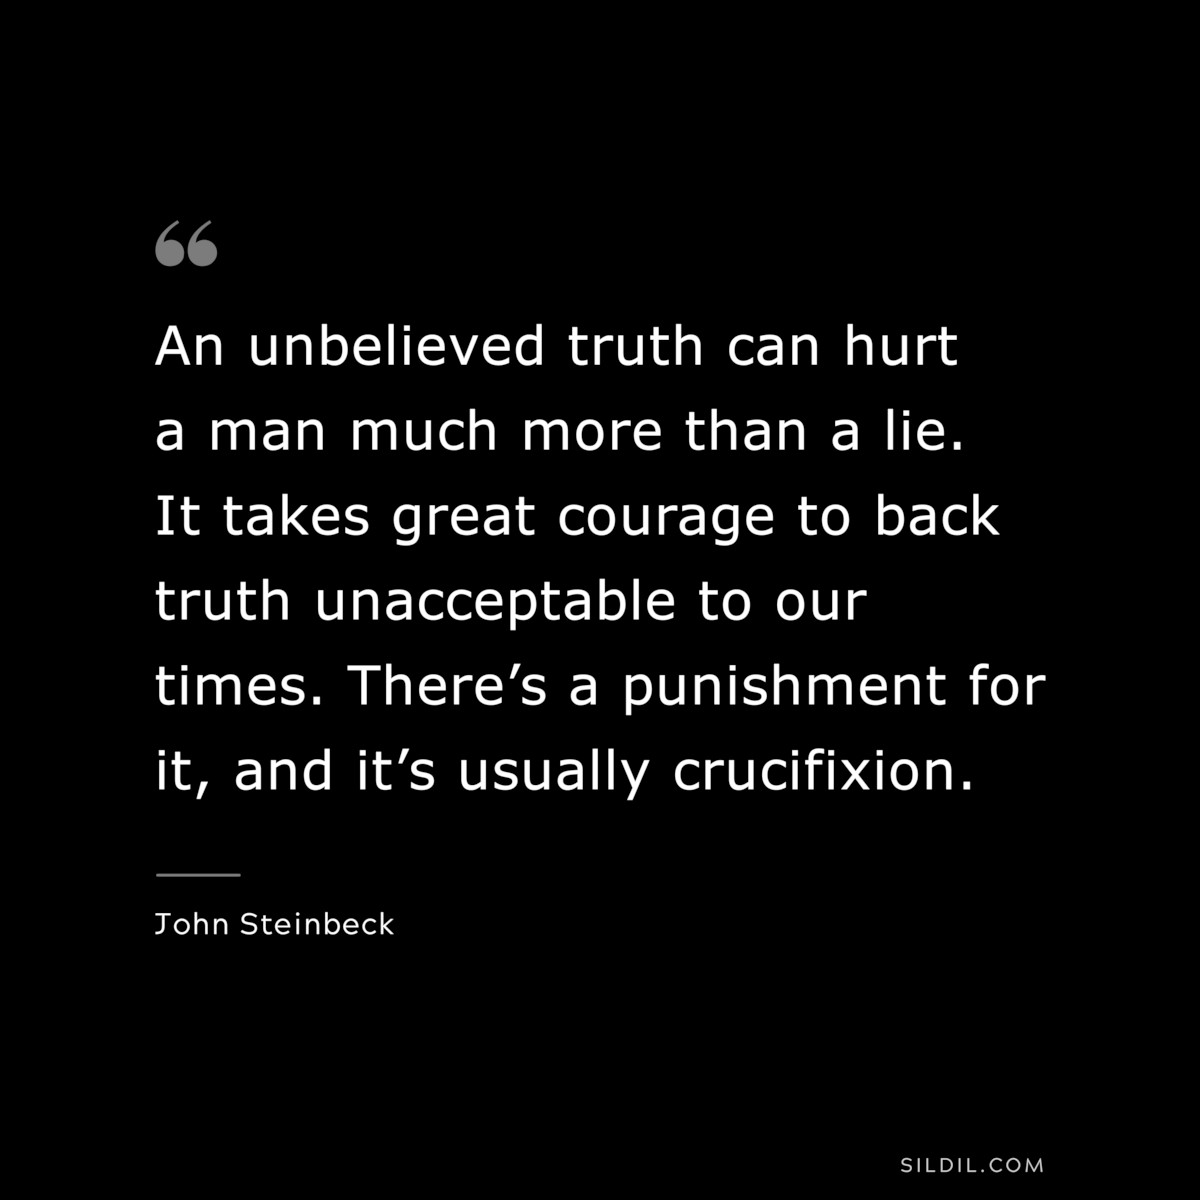 An unbelieved truth can hurt a man much more than a lie. It takes great courage to back truth unacceptable to our times. There’s a punishment for it, and it’s usually crucifixion.― John Steinbeck